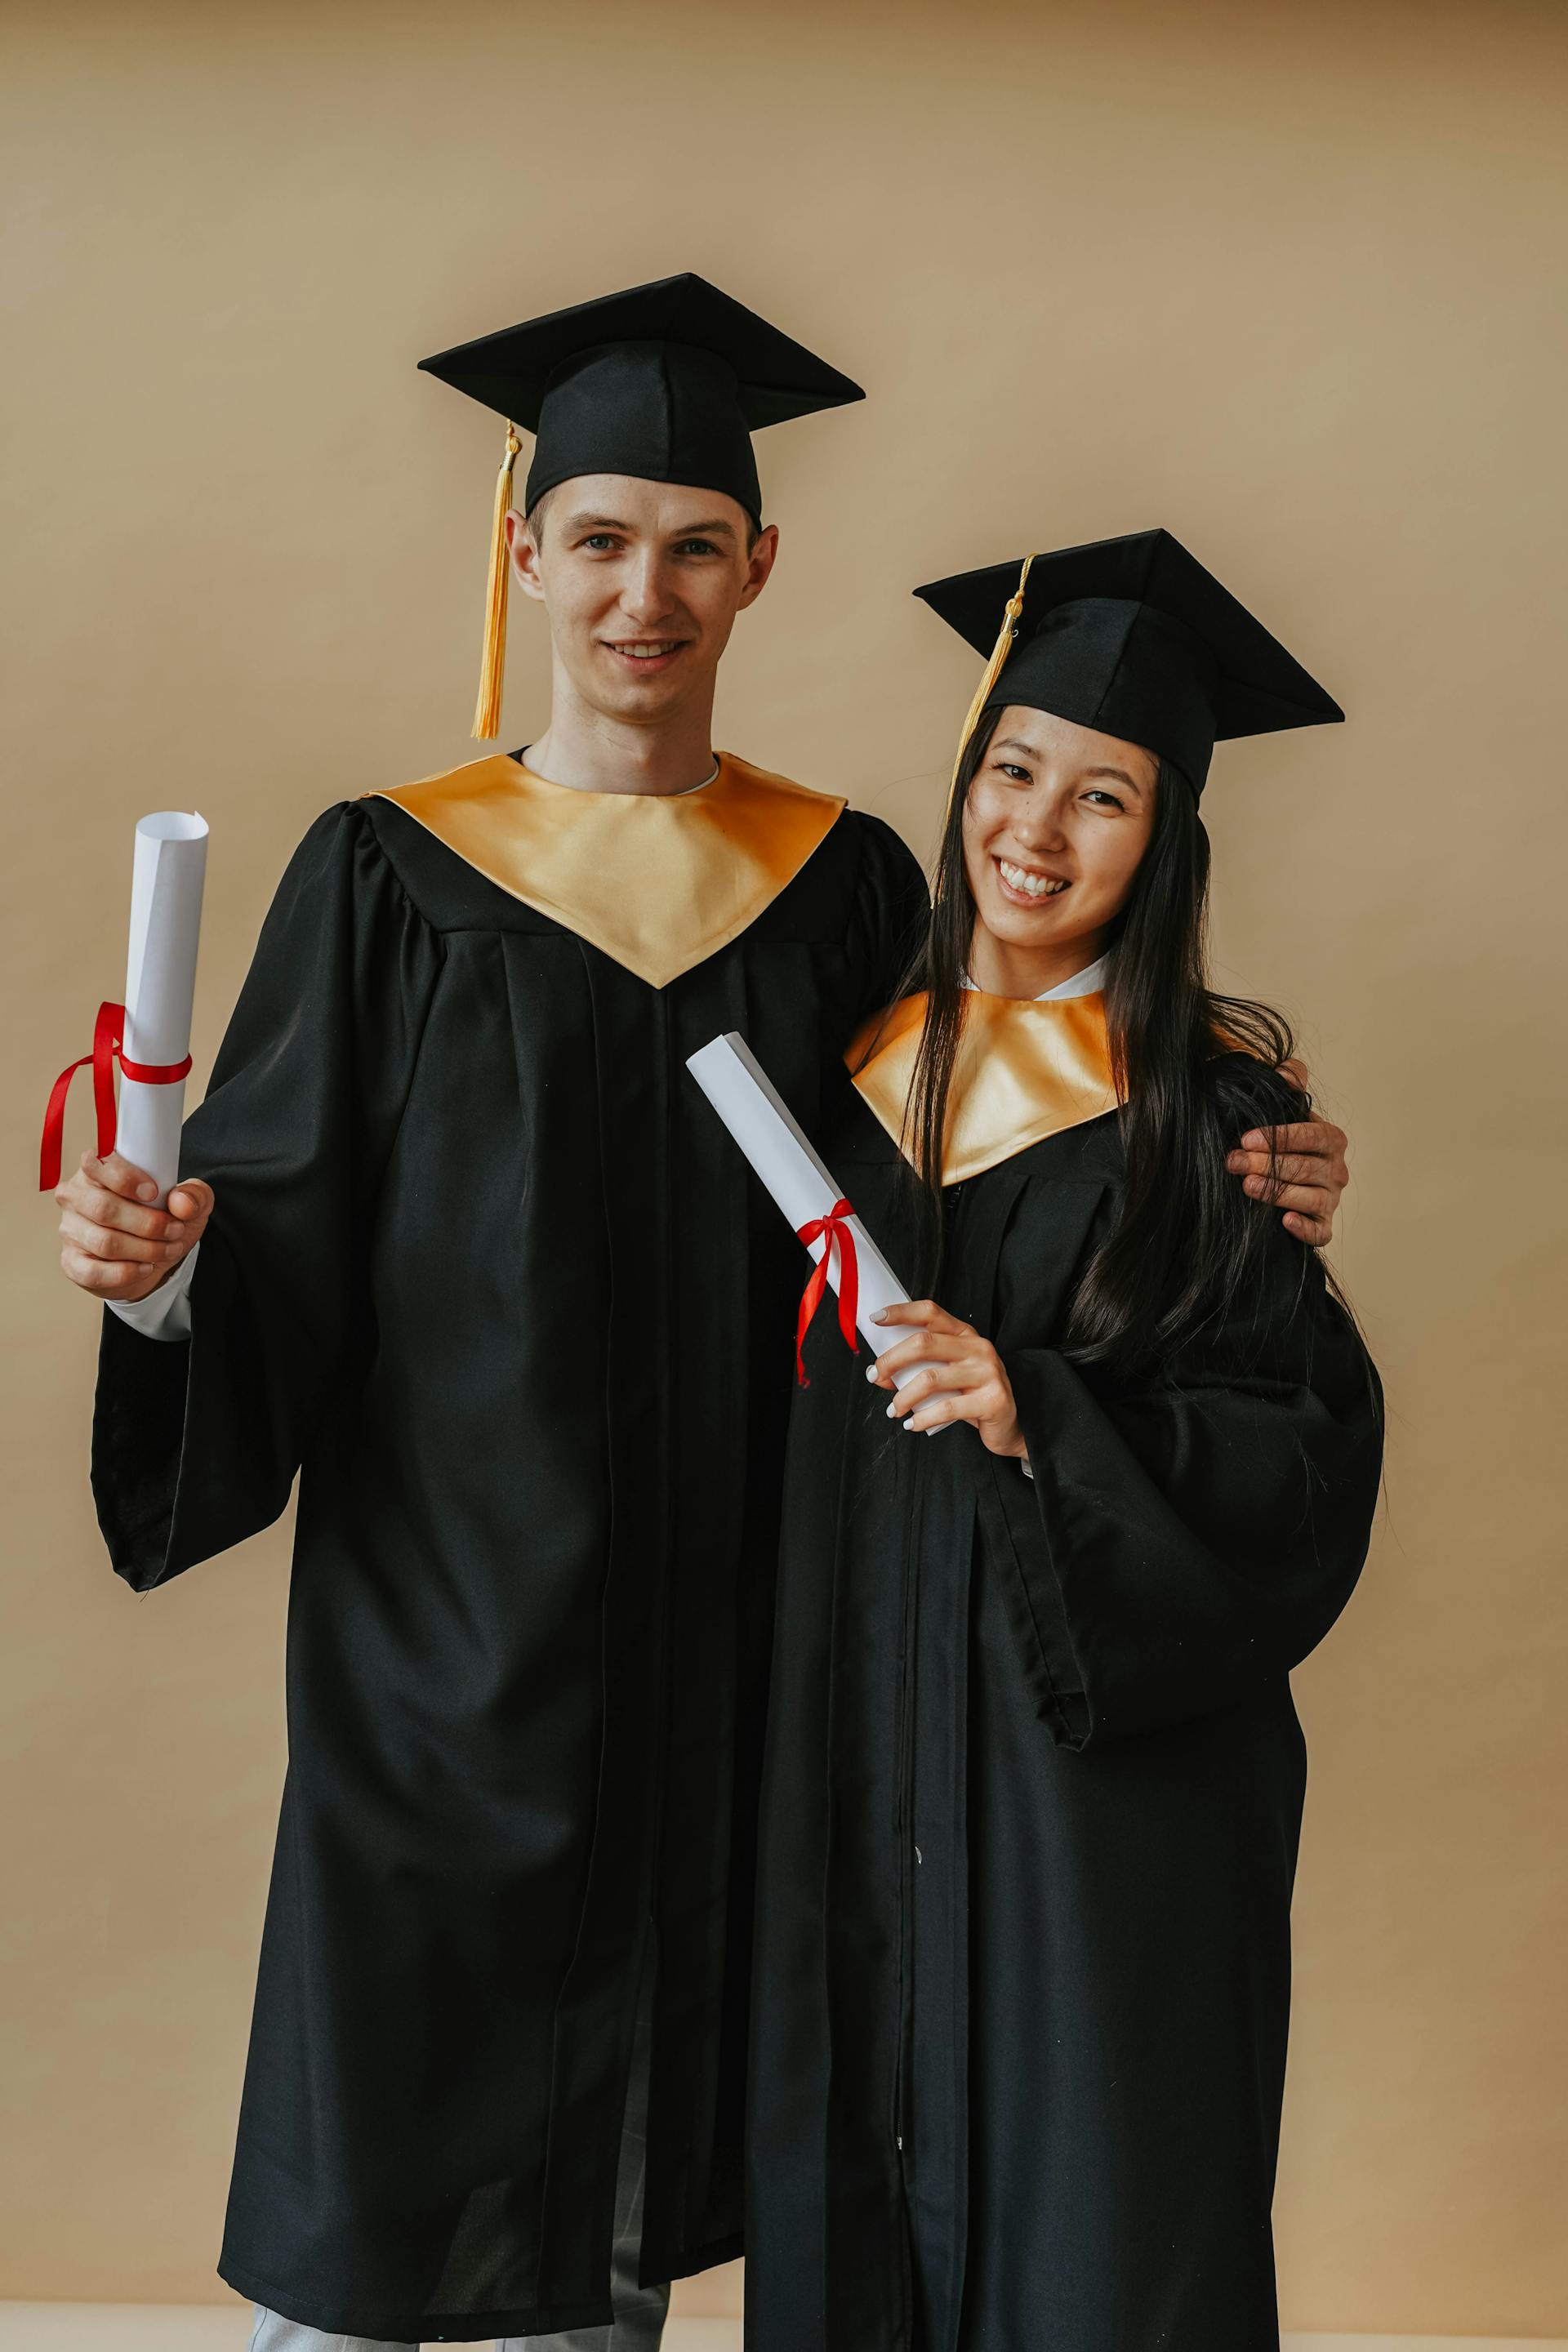 A couple in graduation gowns | Source: Pexels